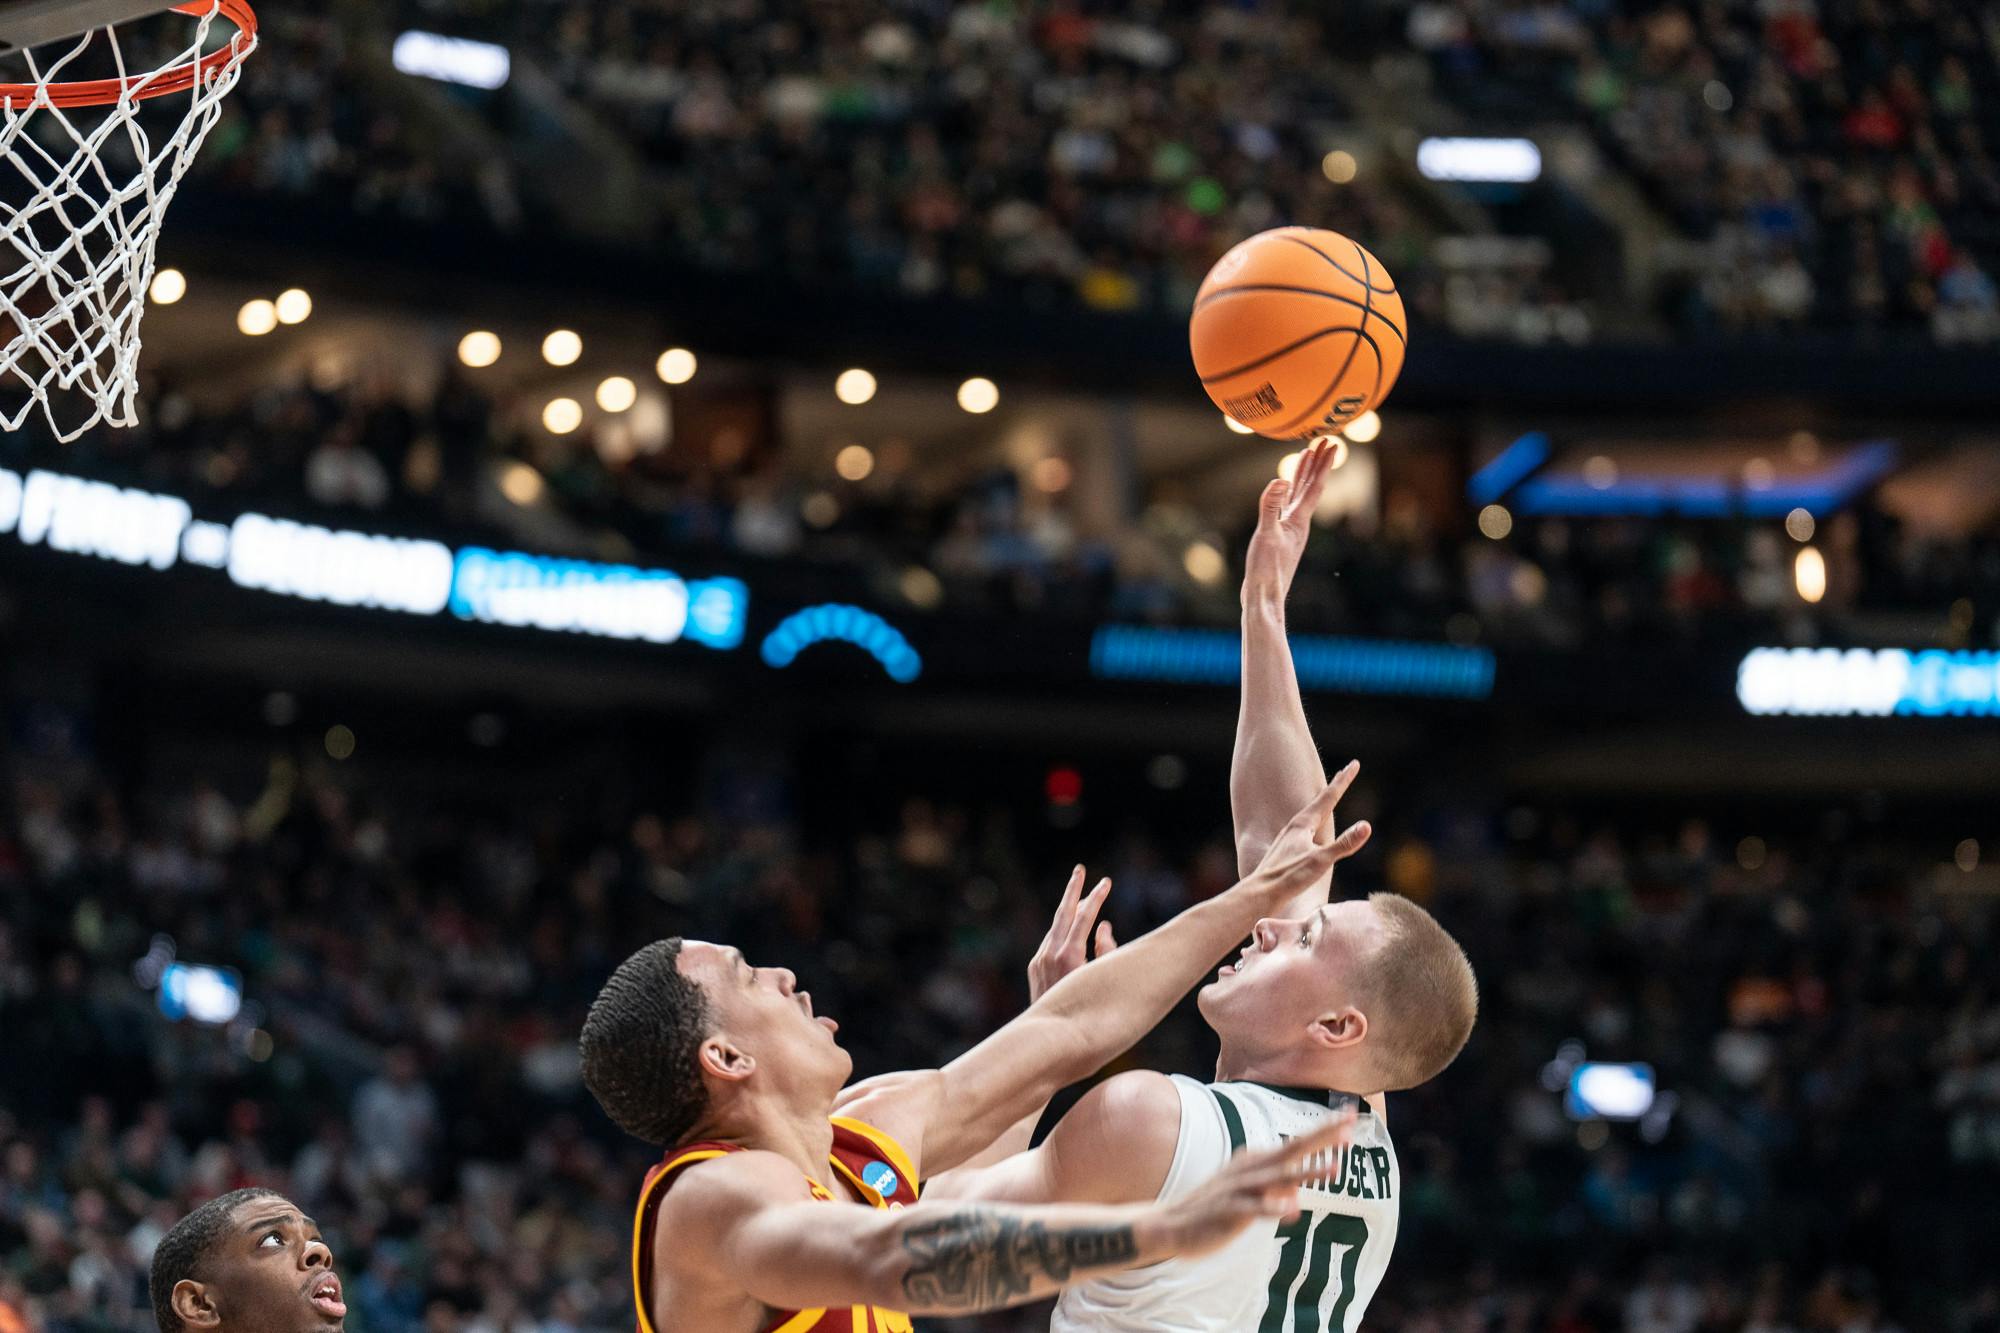 Graduate student forward Joey Hauser shoots the ball at Nationwide Arena in Columbus, Ohio on March 17, 2023. The Spartans beat the Trojans, 72-62 in the first round of March Madness.